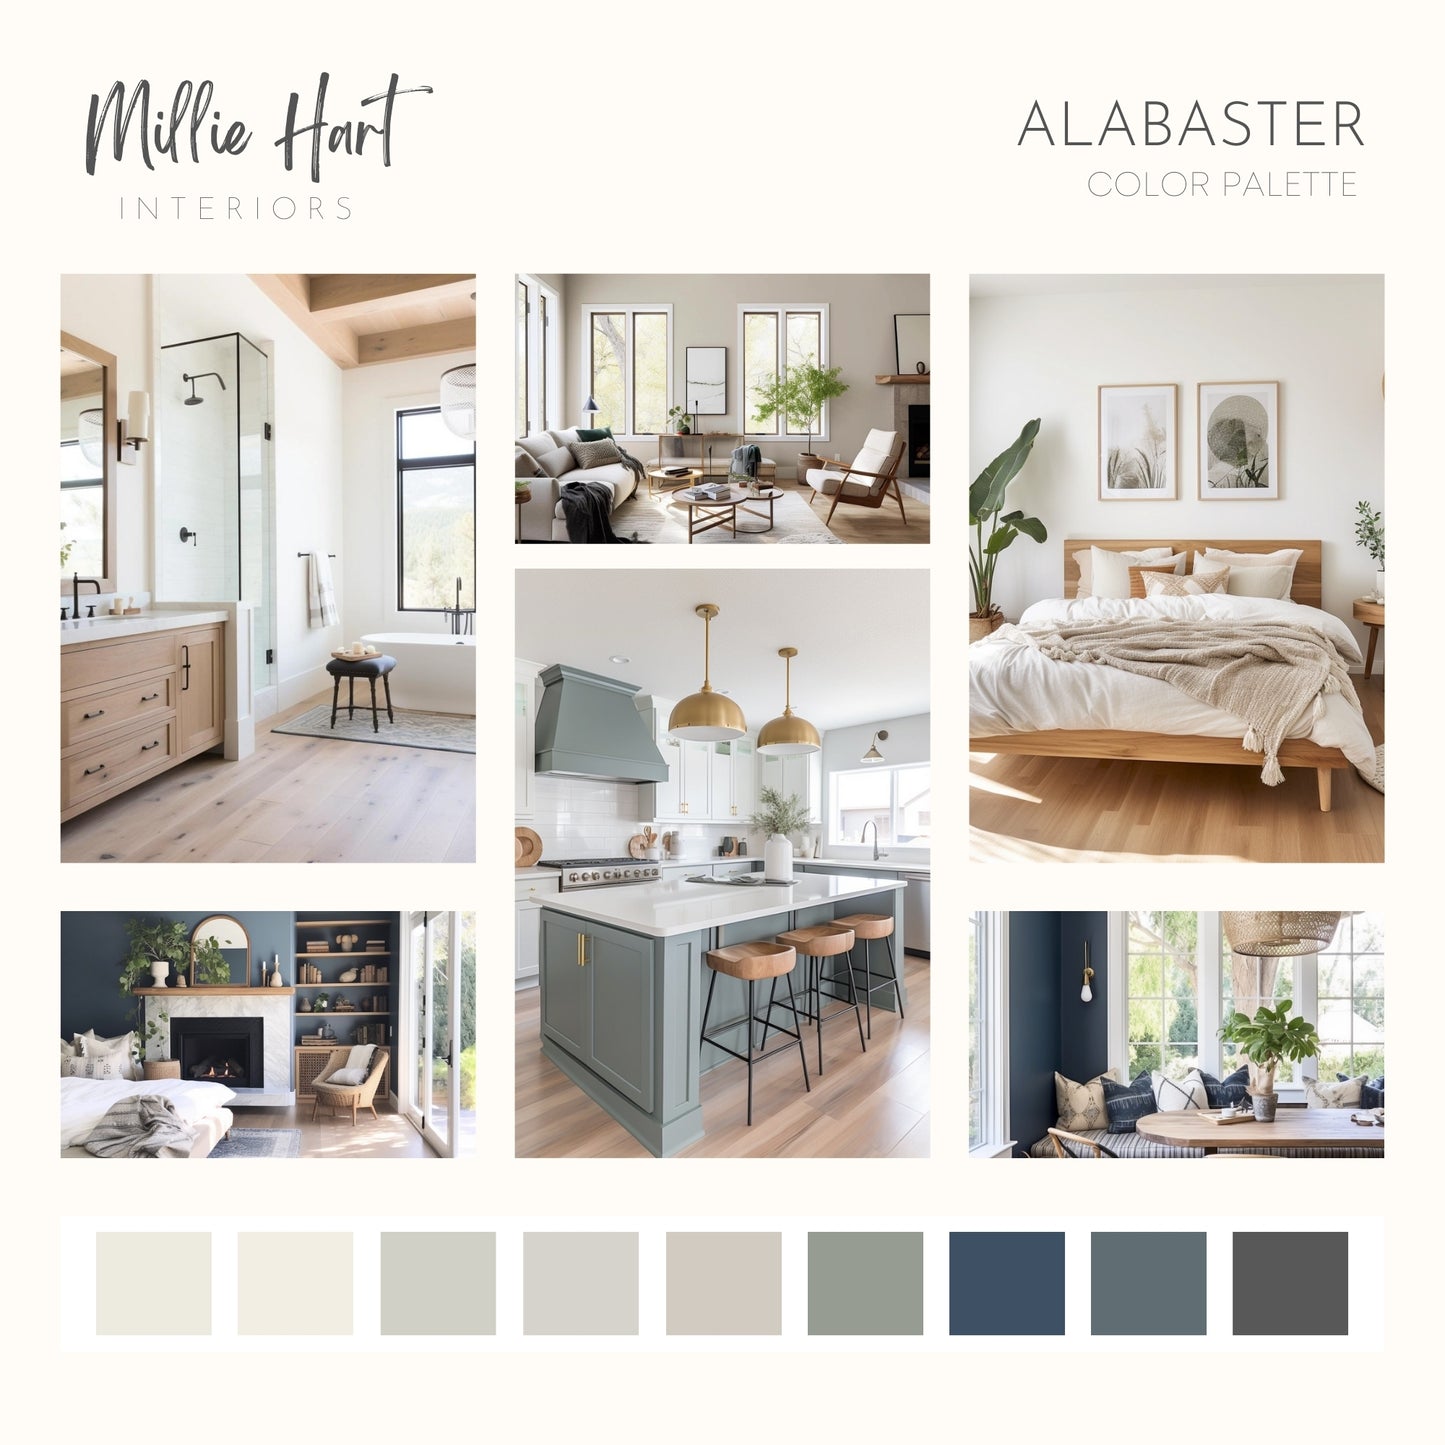 Alabaster Sherwin Williams Paint Palette, Modern Neutral Interior Paint Colors for Home, Alabaster Compliments, Warm Whites, Agreeable Gray